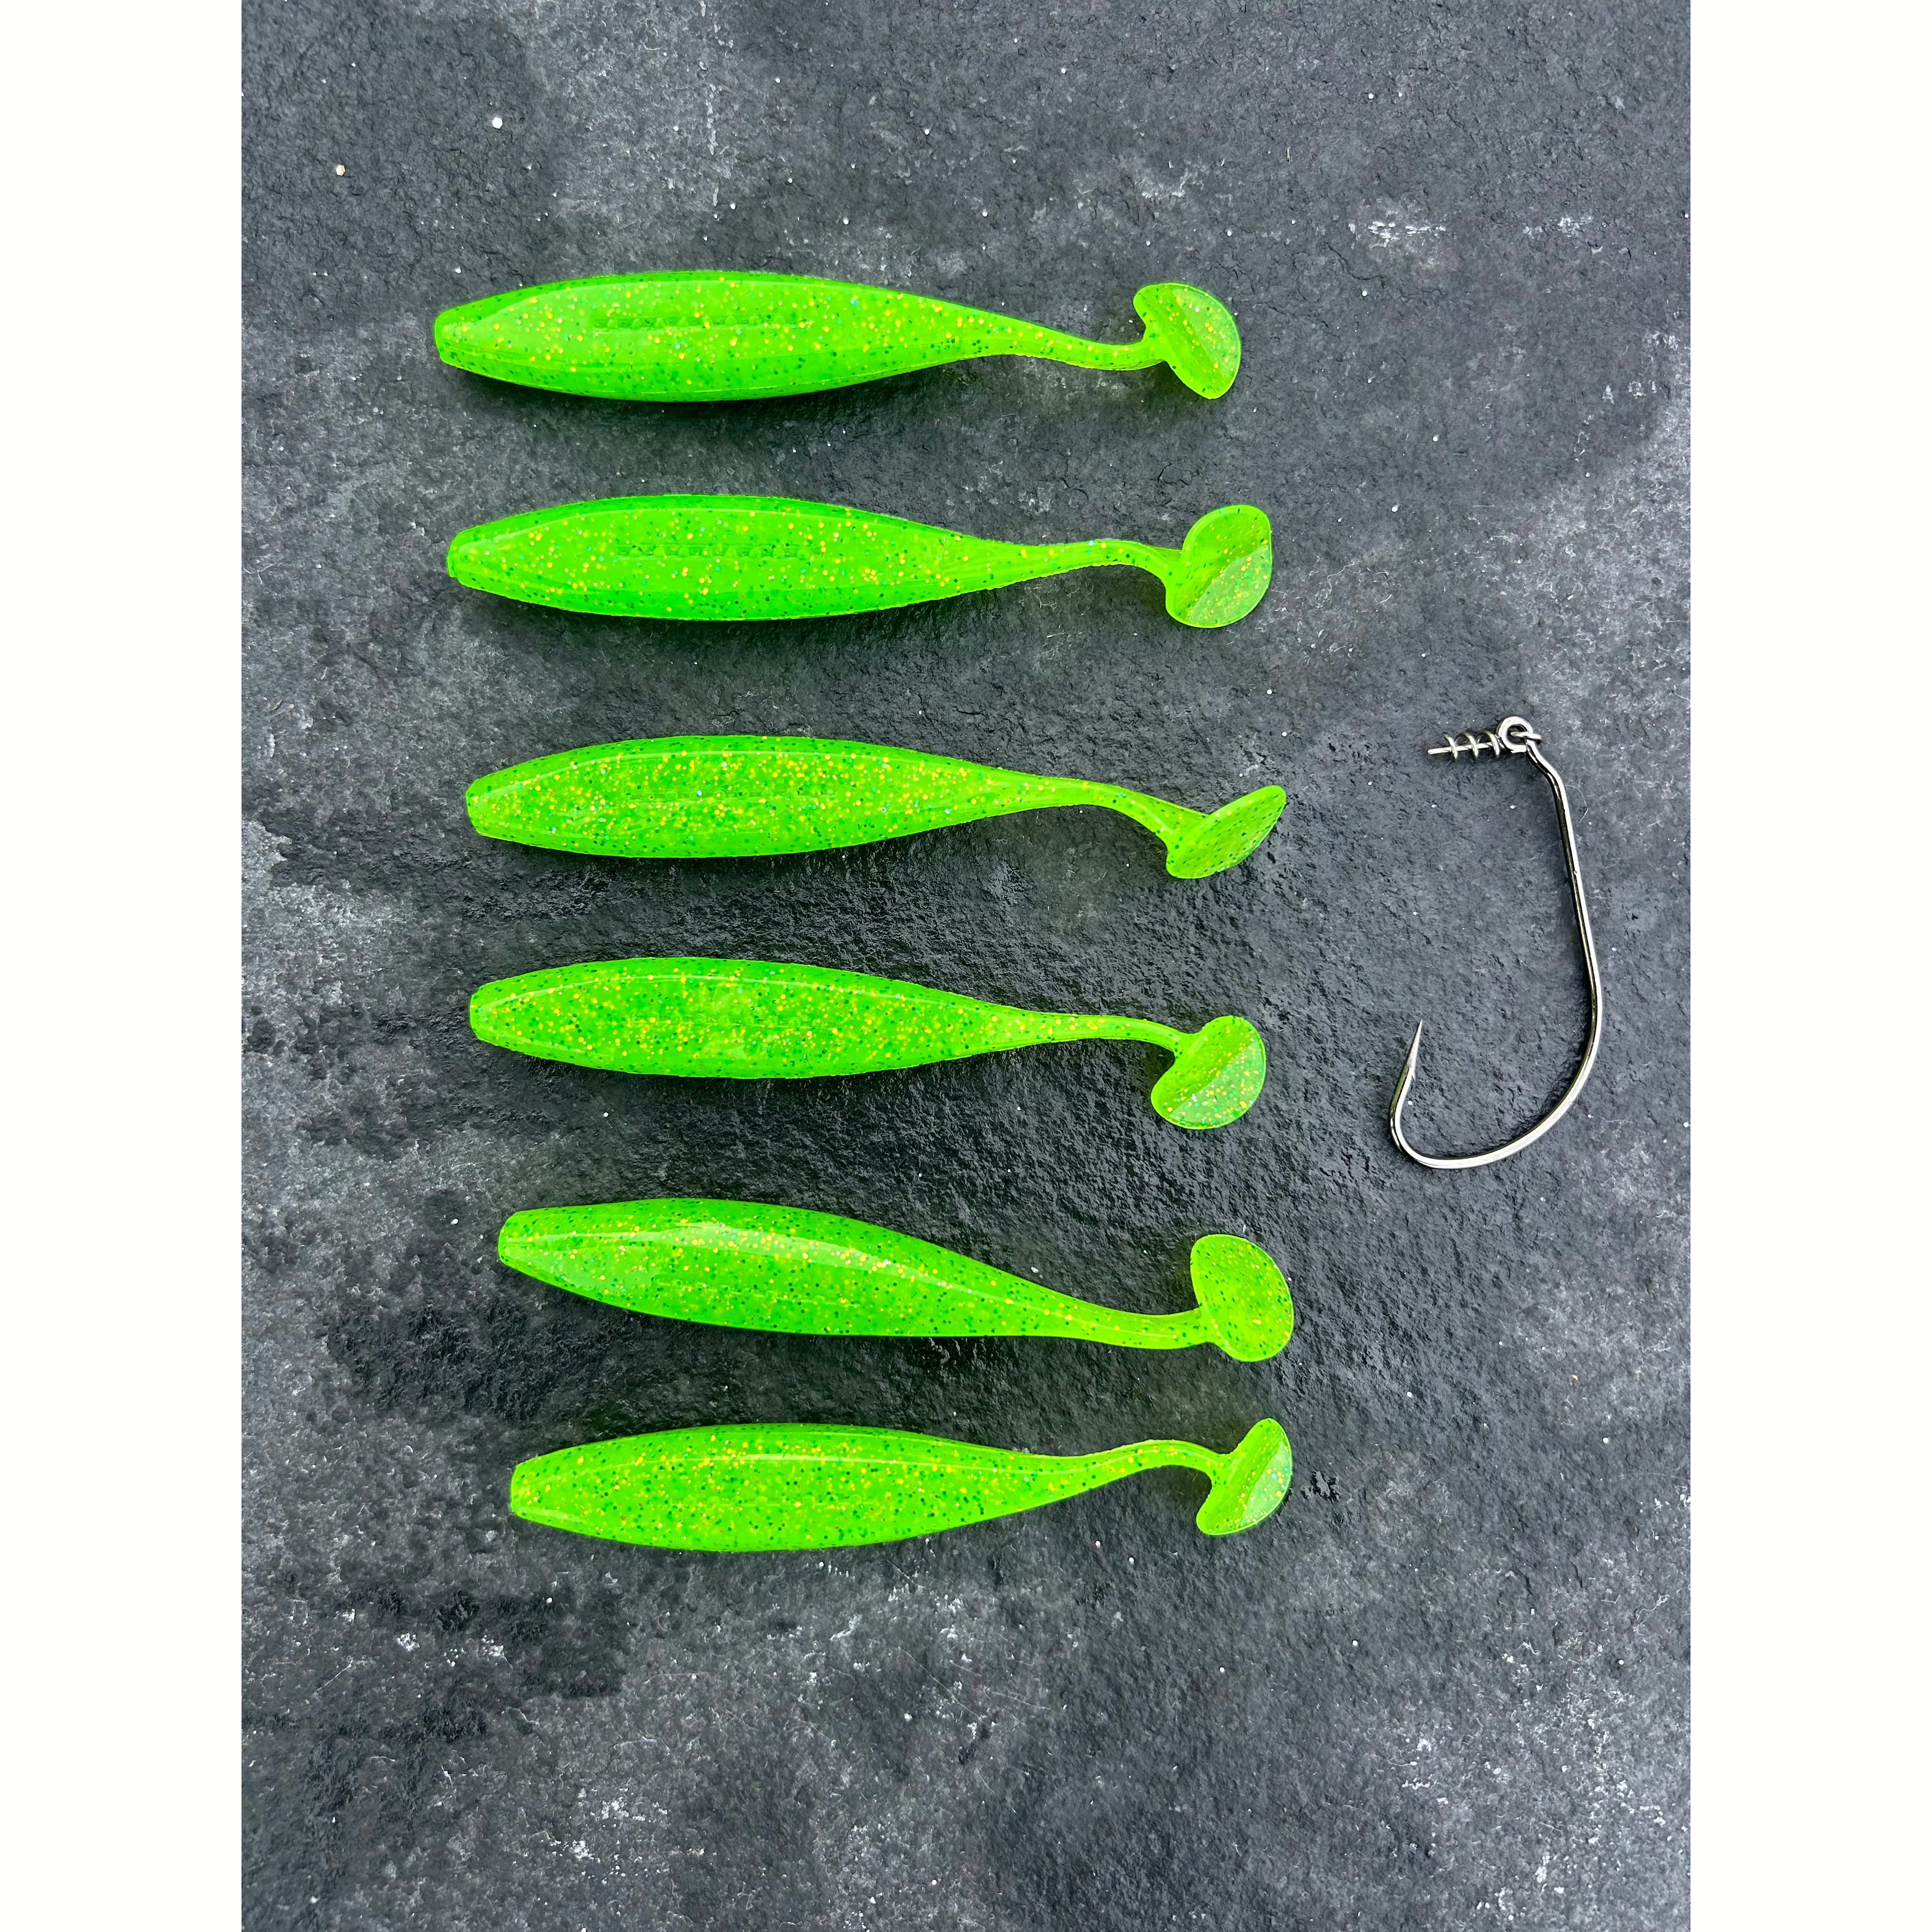 Small Weedless Bass Lure Shads 90mm 8g